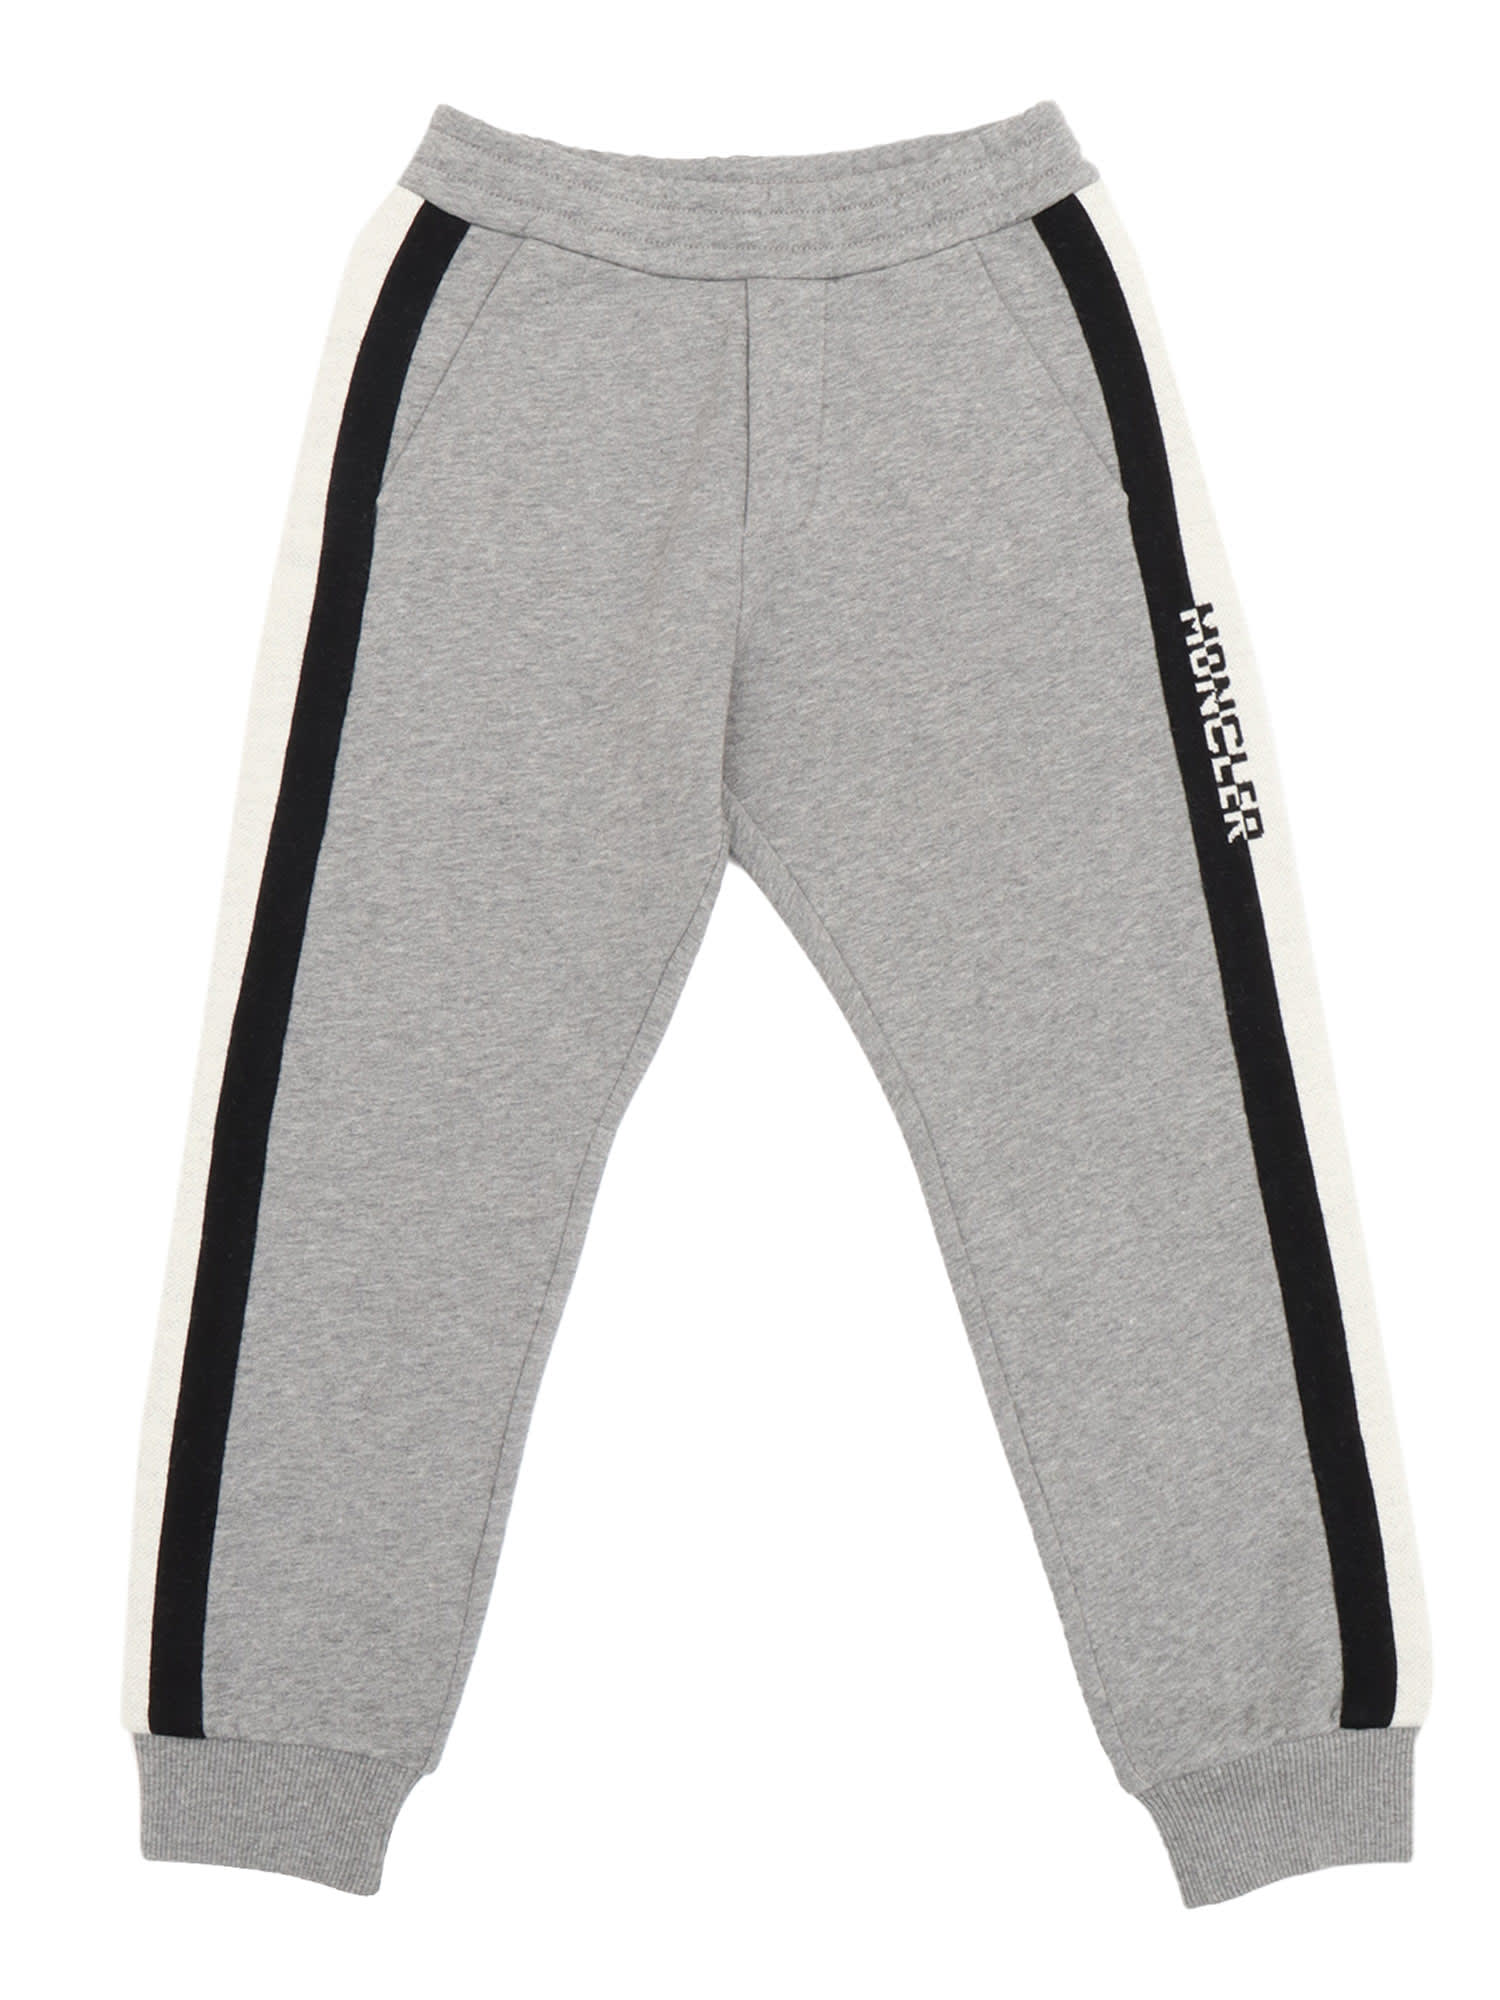 MONCLER TRACK PANTS IN GREY